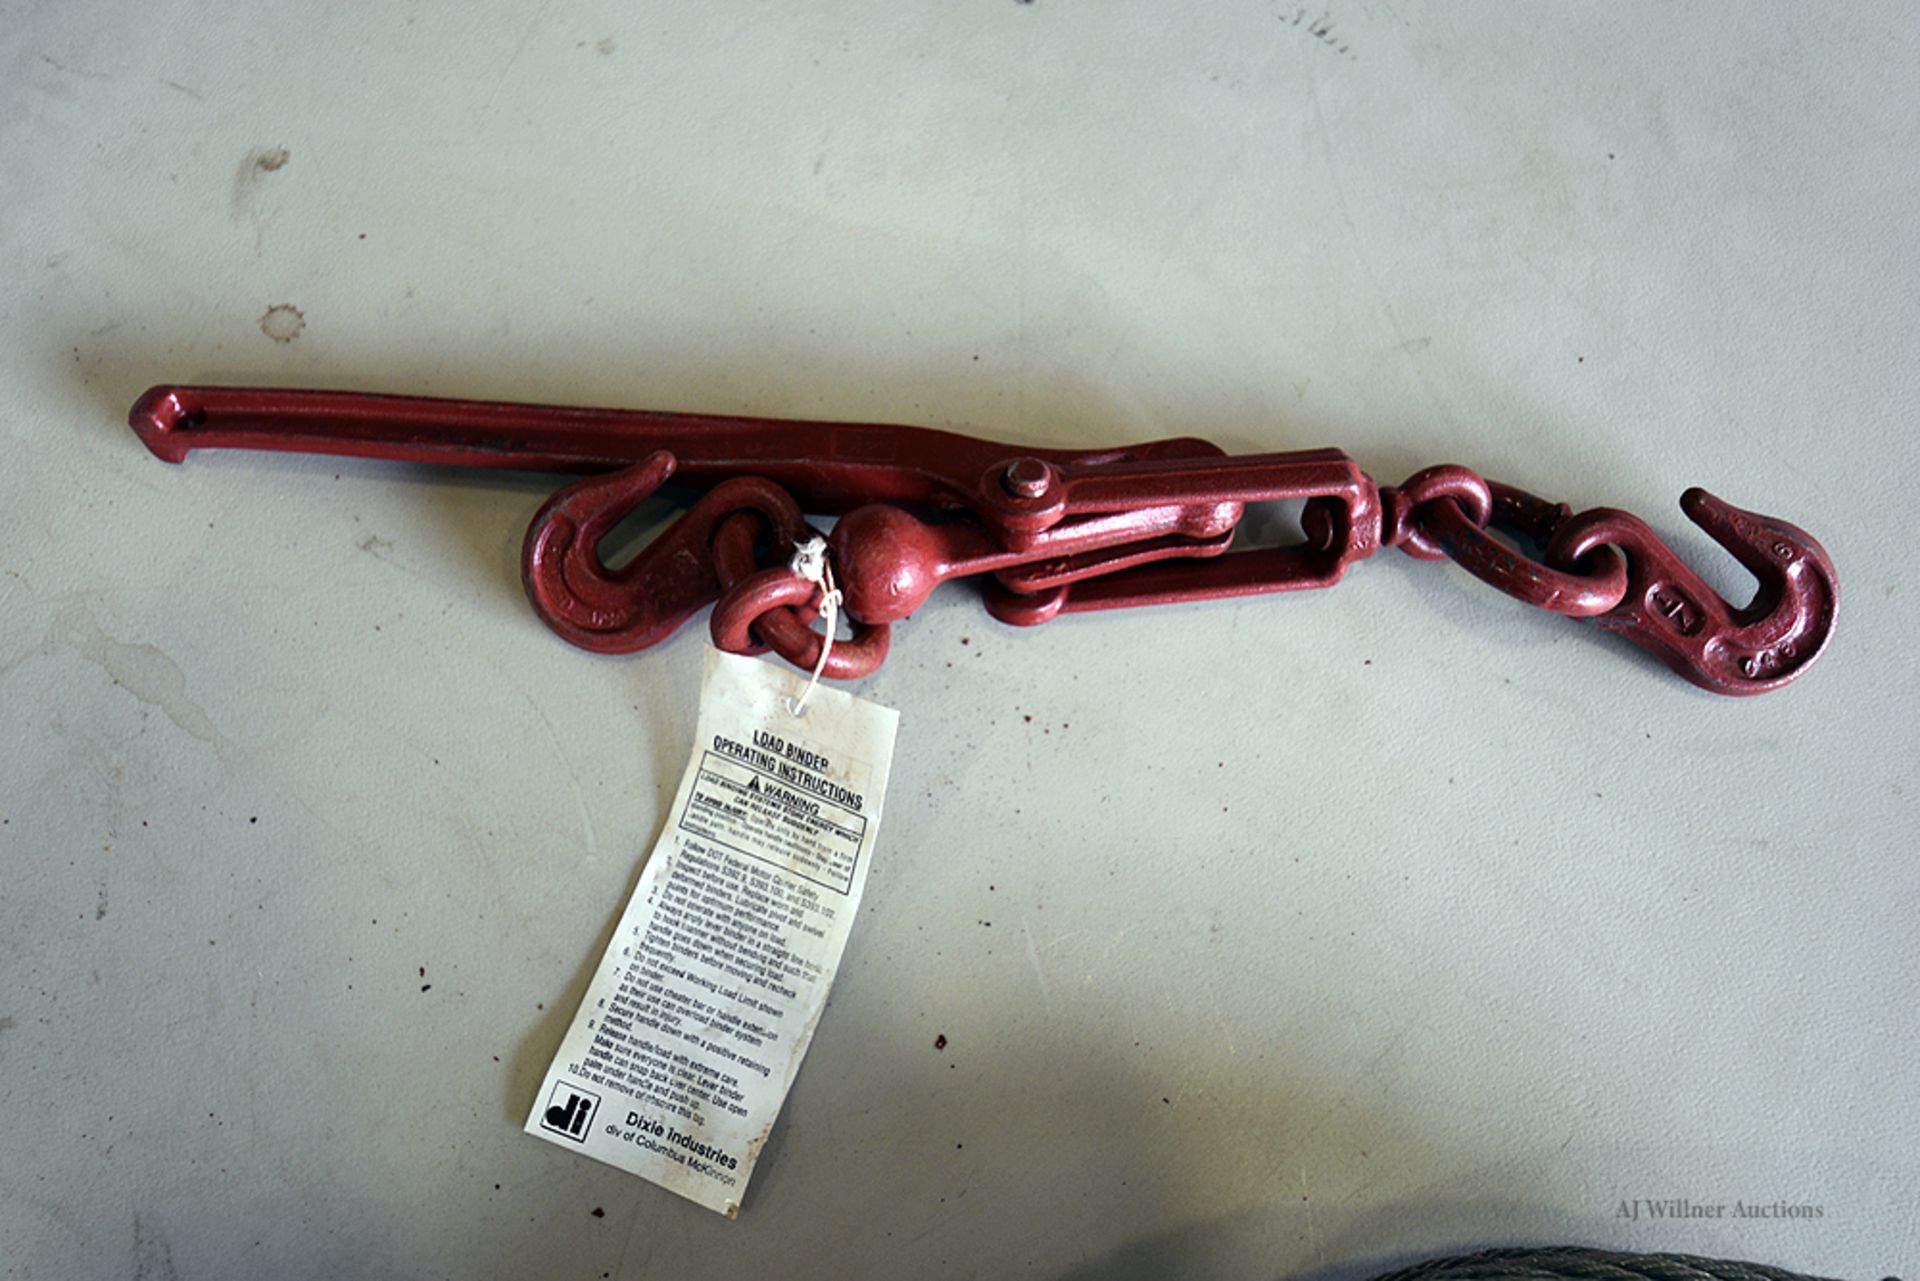 Johnson Capacity Hoist, Binders and Braided Cable Slings - Image 5 of 6